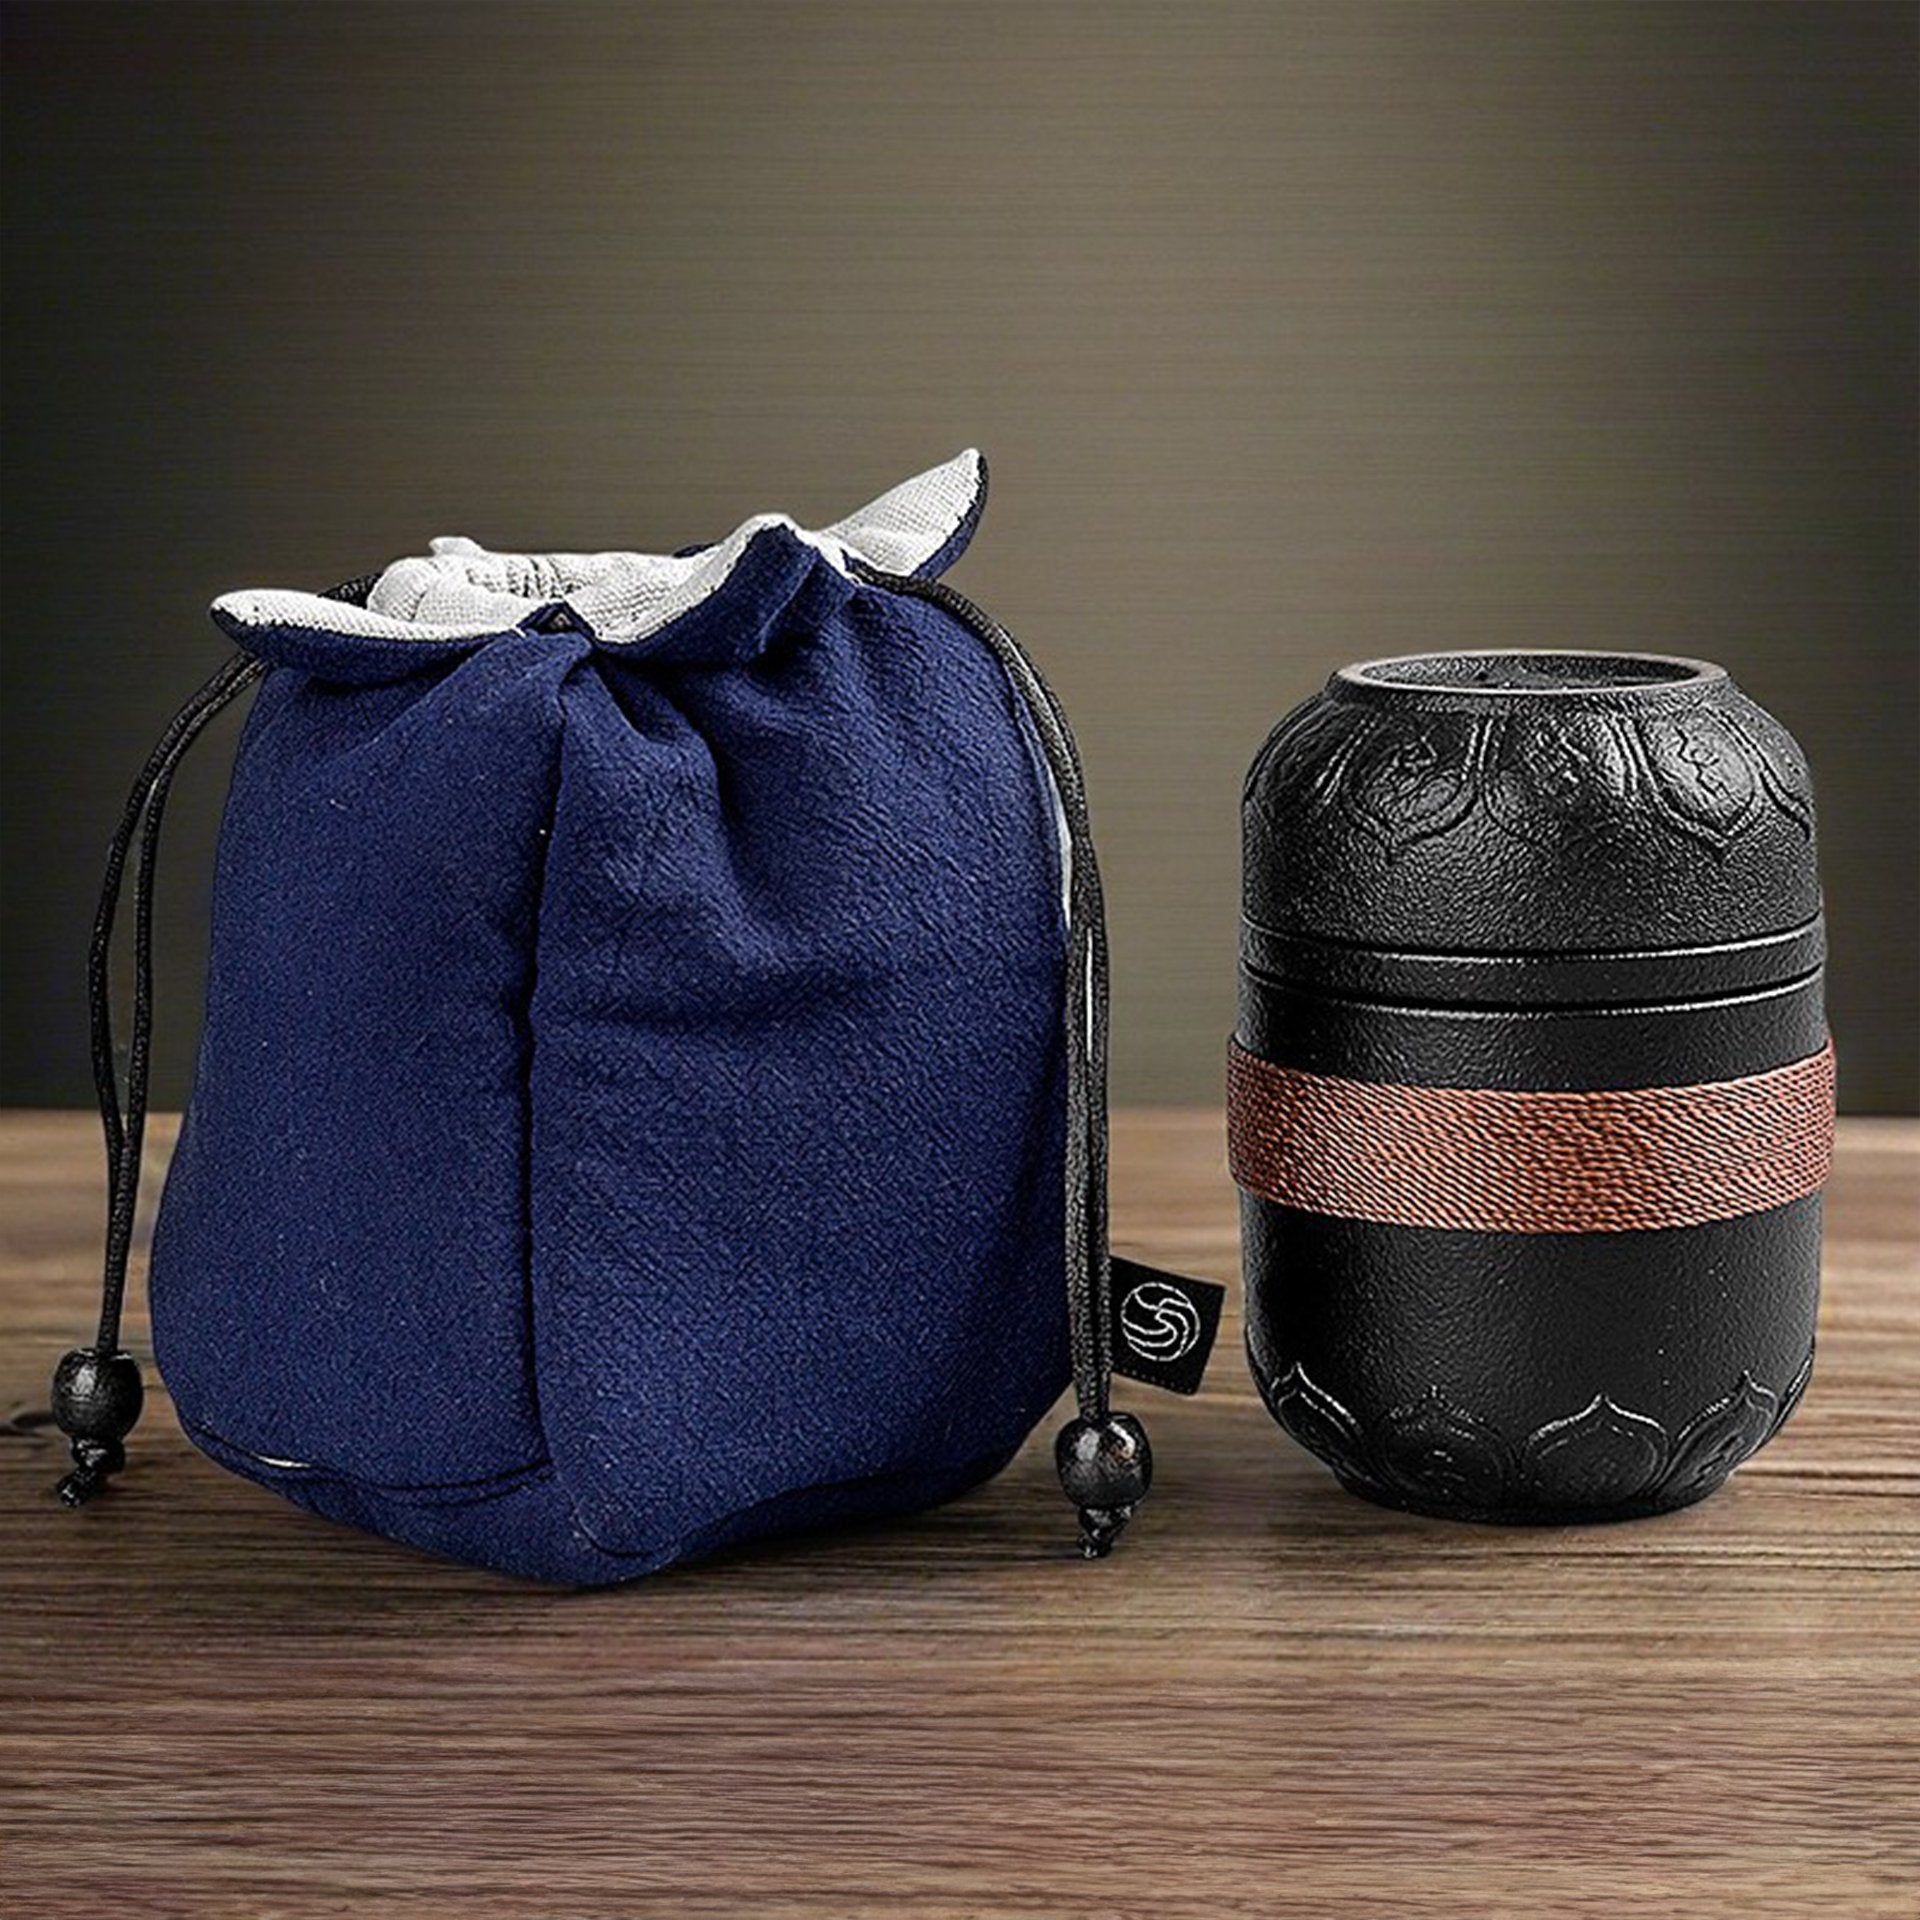 A black portable teapot with a copper band next to a blue fabric drawstring bag on a wooden surface.